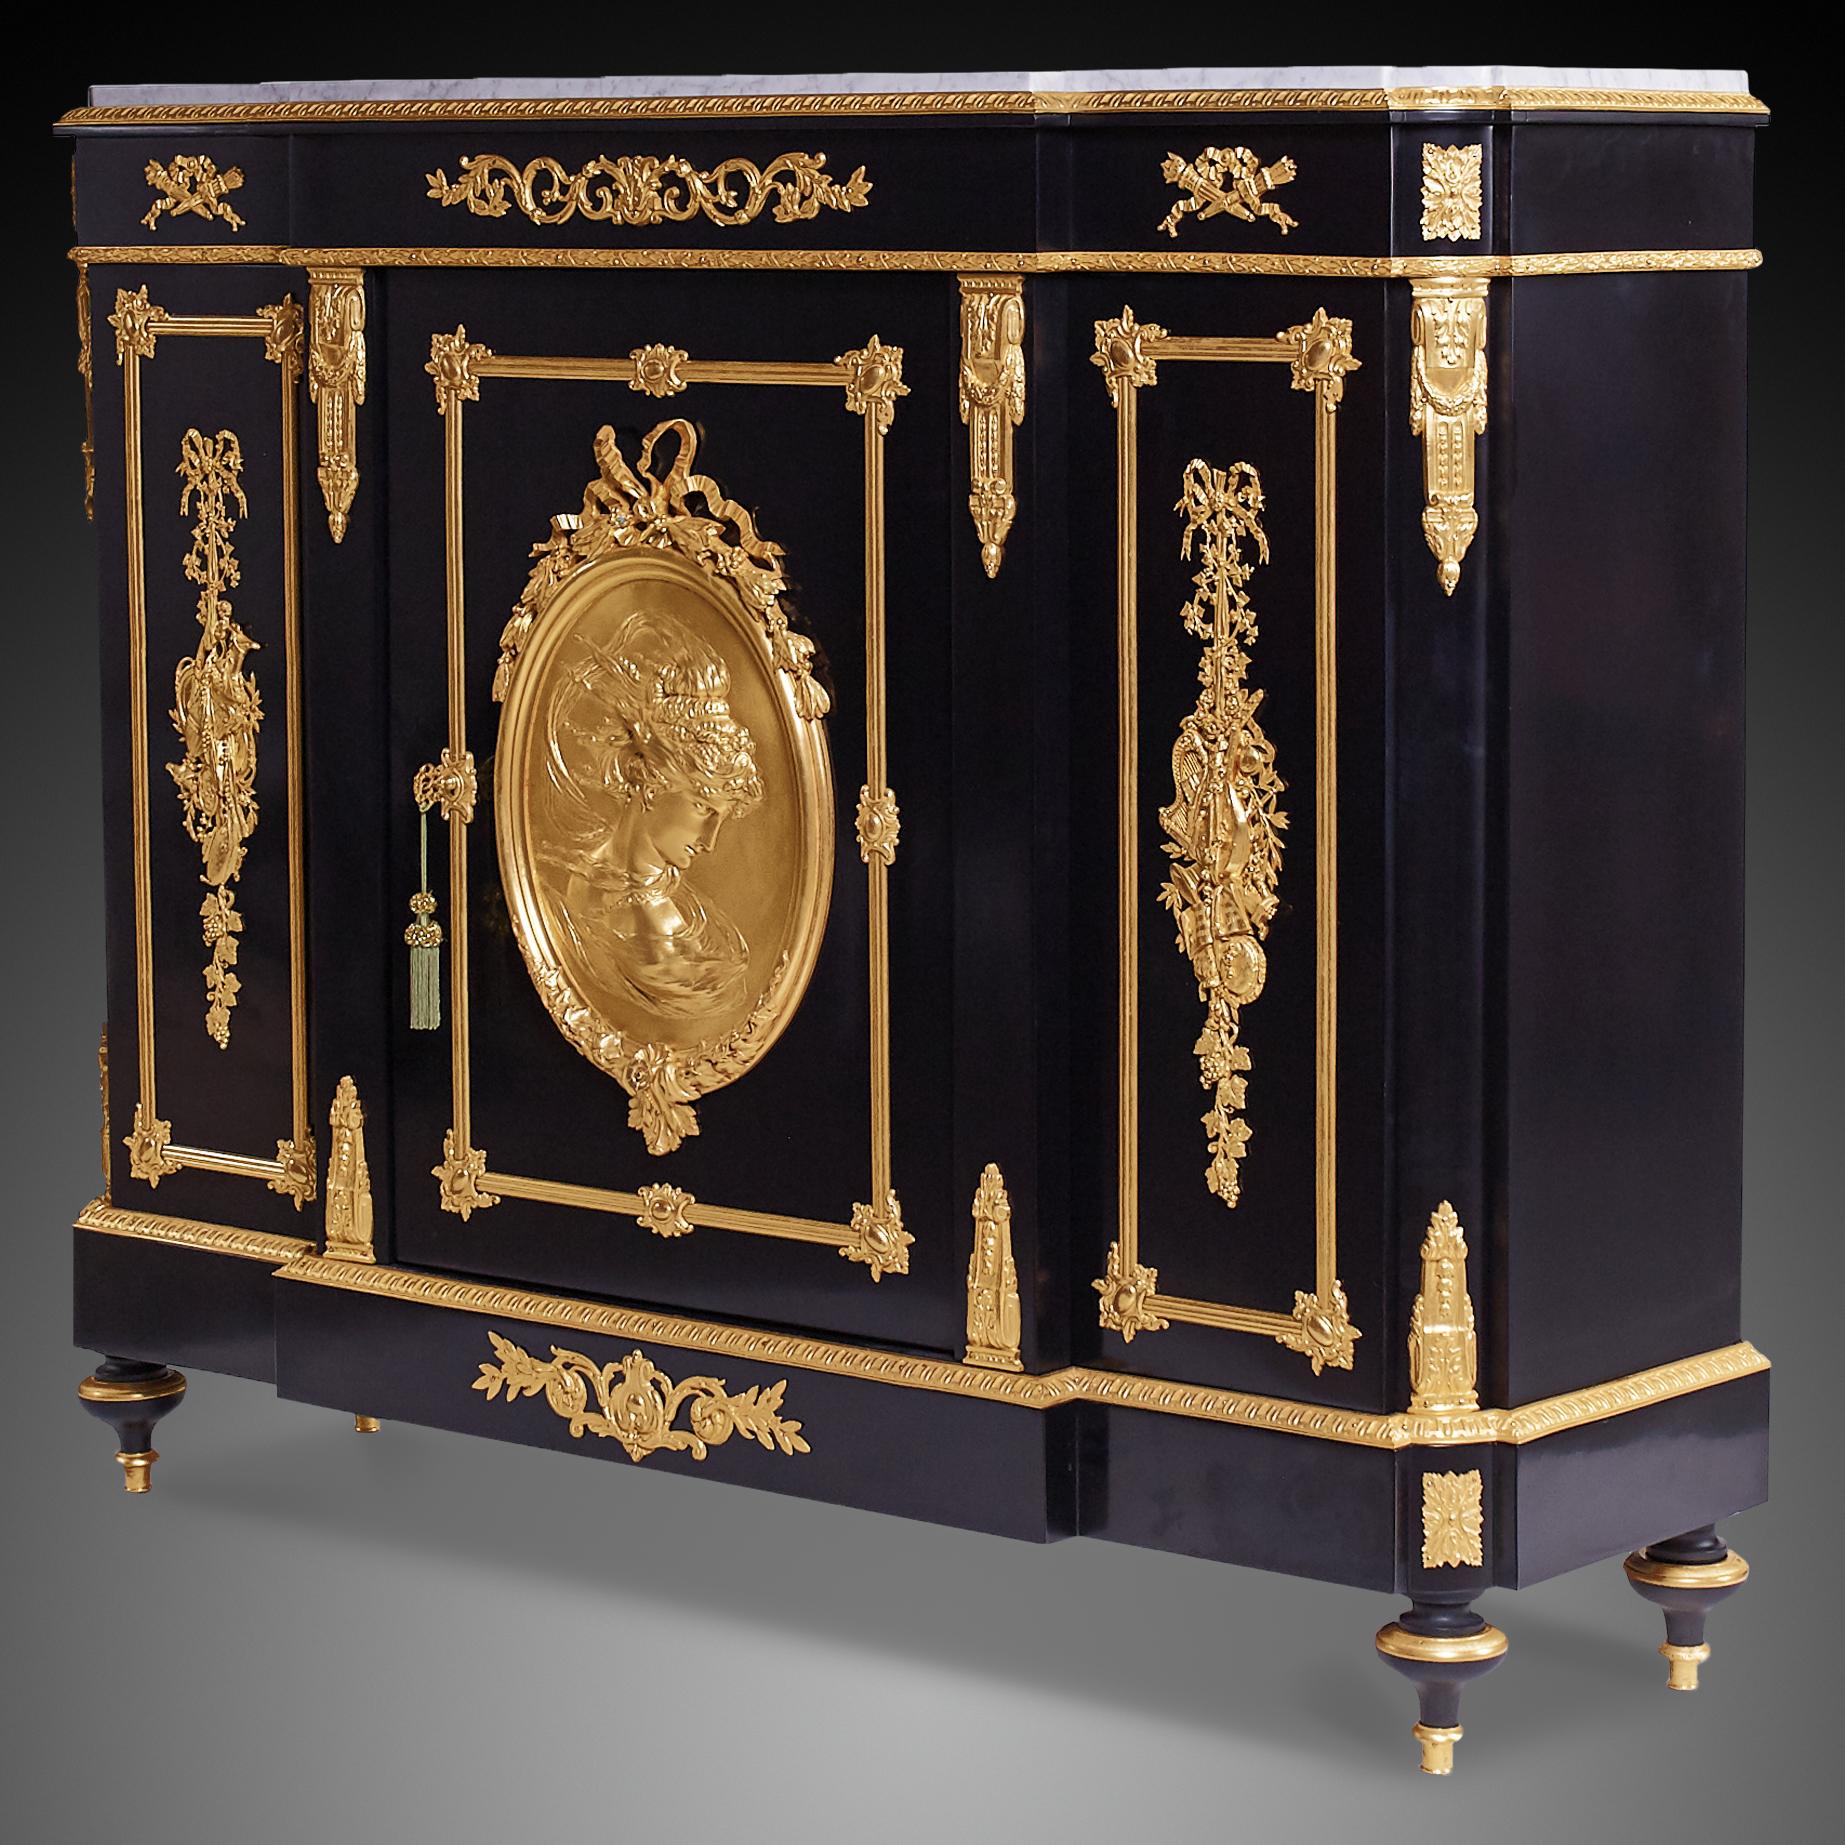 Gilt French 19th Century Napoleon III Period Cabinet by Diehl